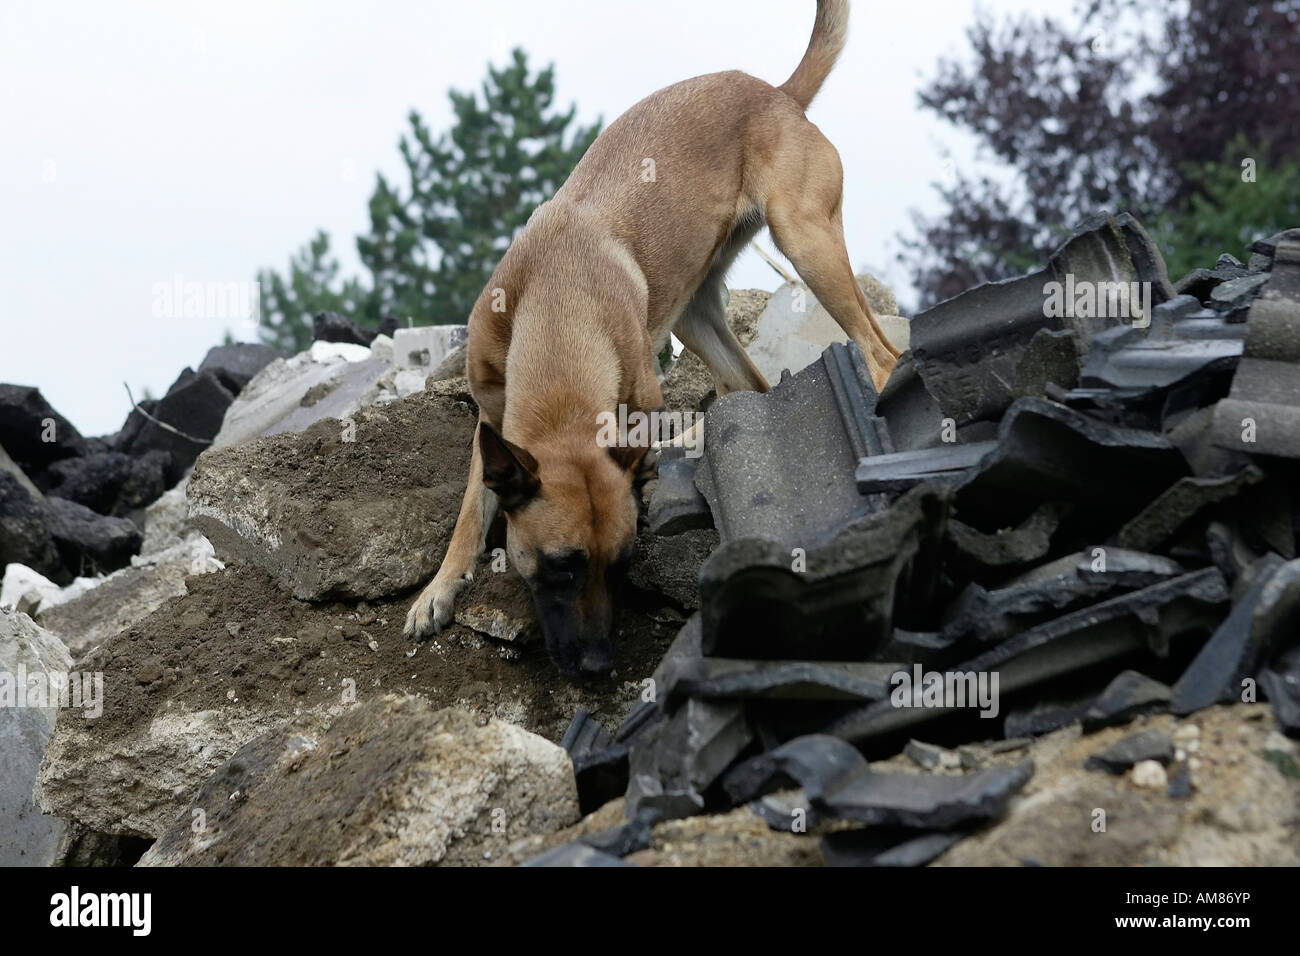 Search and rescue dog on a heap of rubble, Diepeschrather Weg, Bergisch Gladbach, North Rhine-Westphalia, Germany Stock Photo